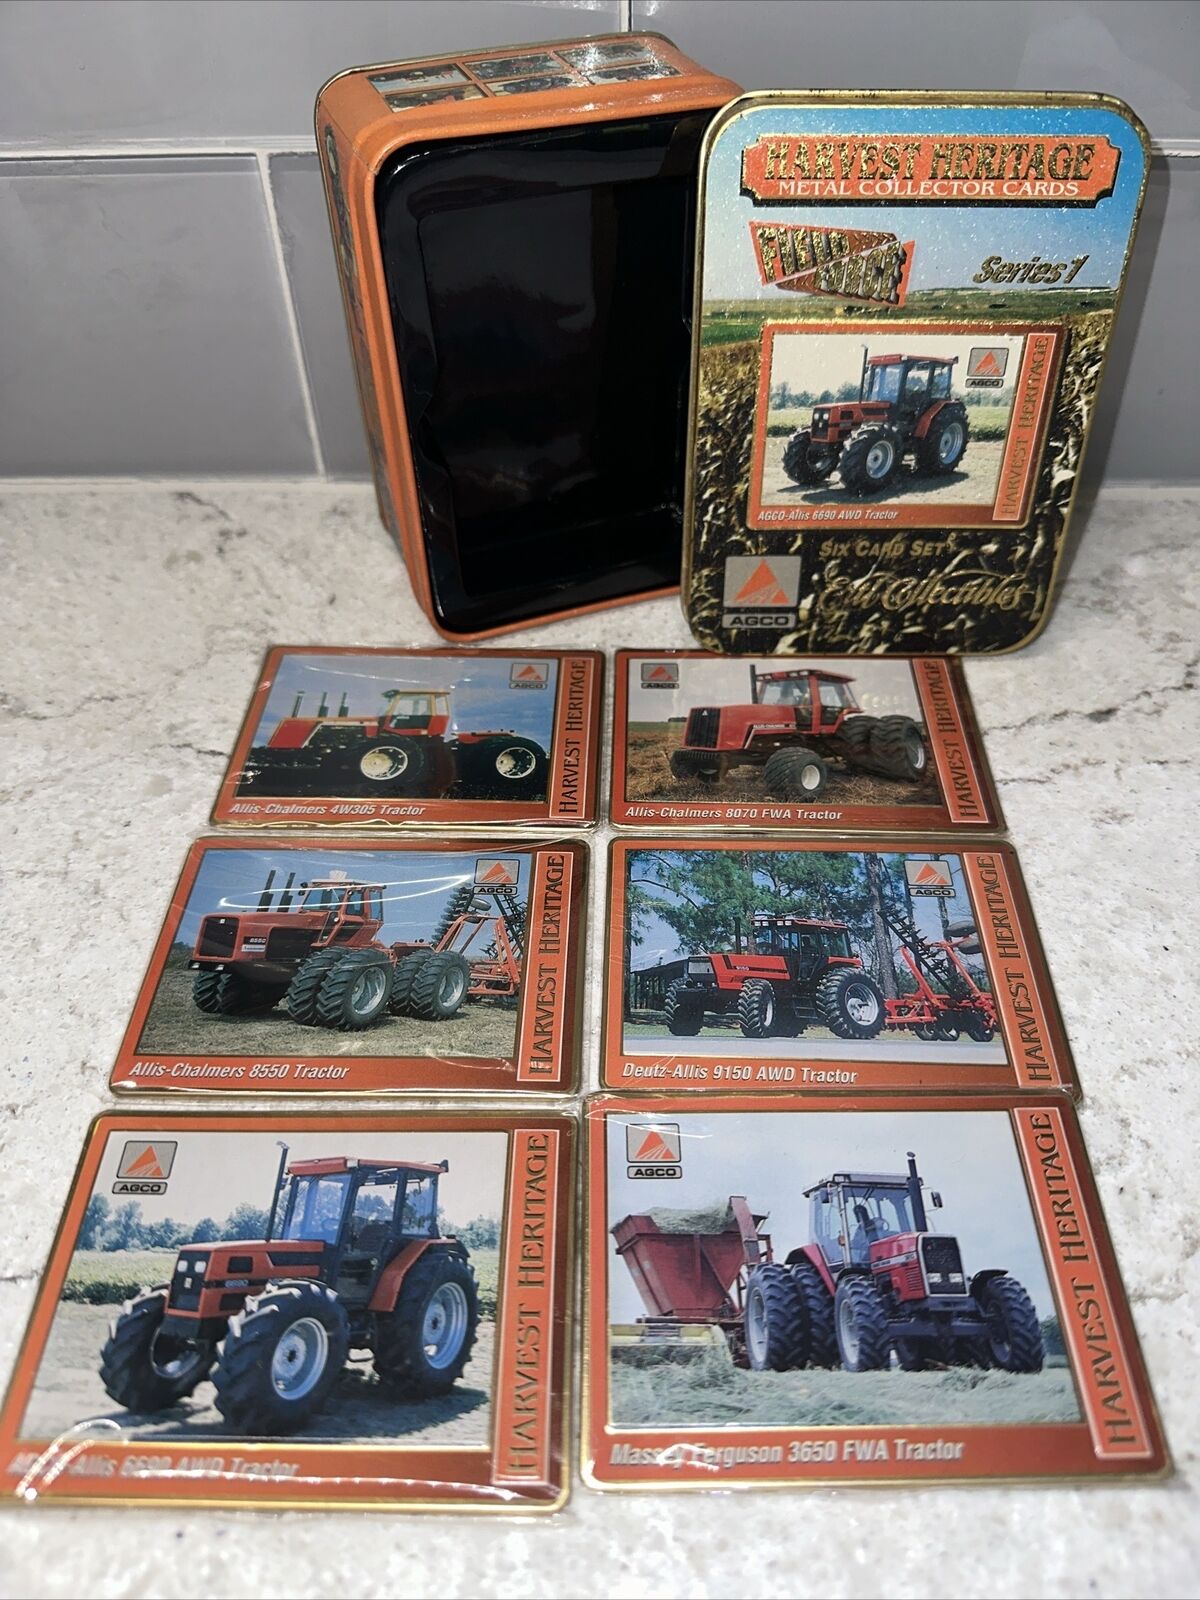 ERTL Harvest Heritage Field Force Series 1 AGCO Metal Collector Cards